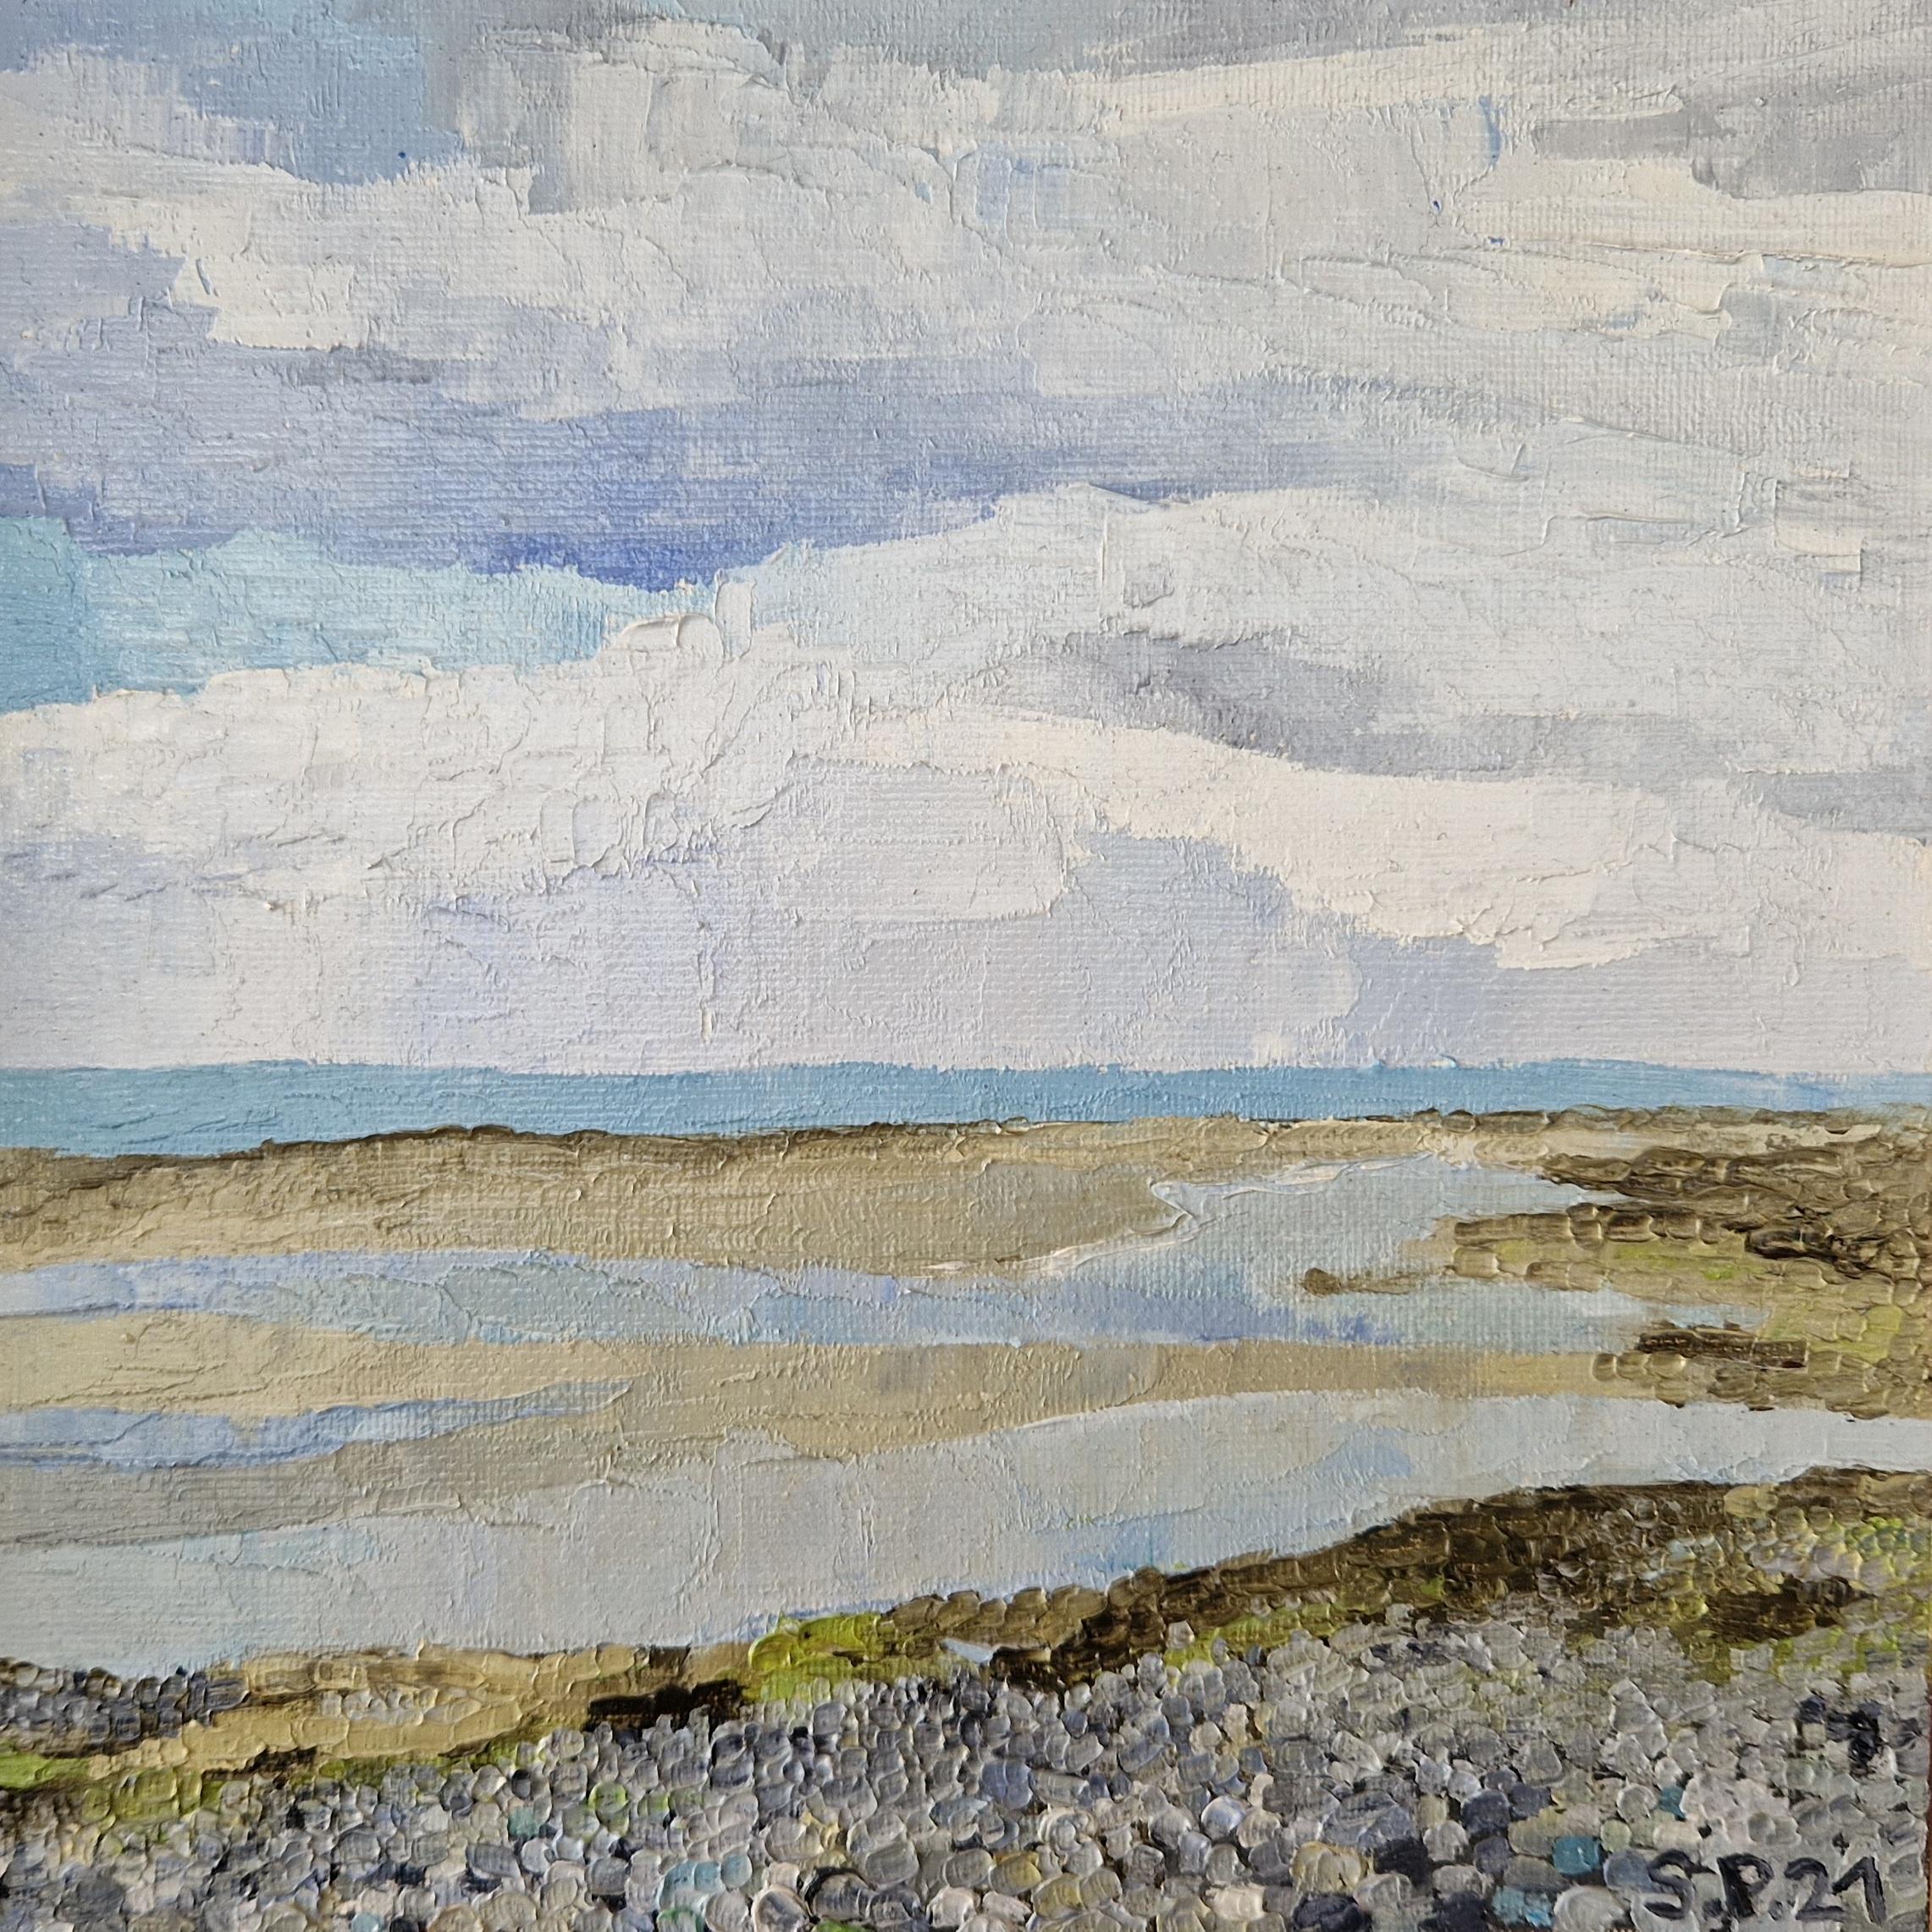 The painting 'Flaggy Shore'.